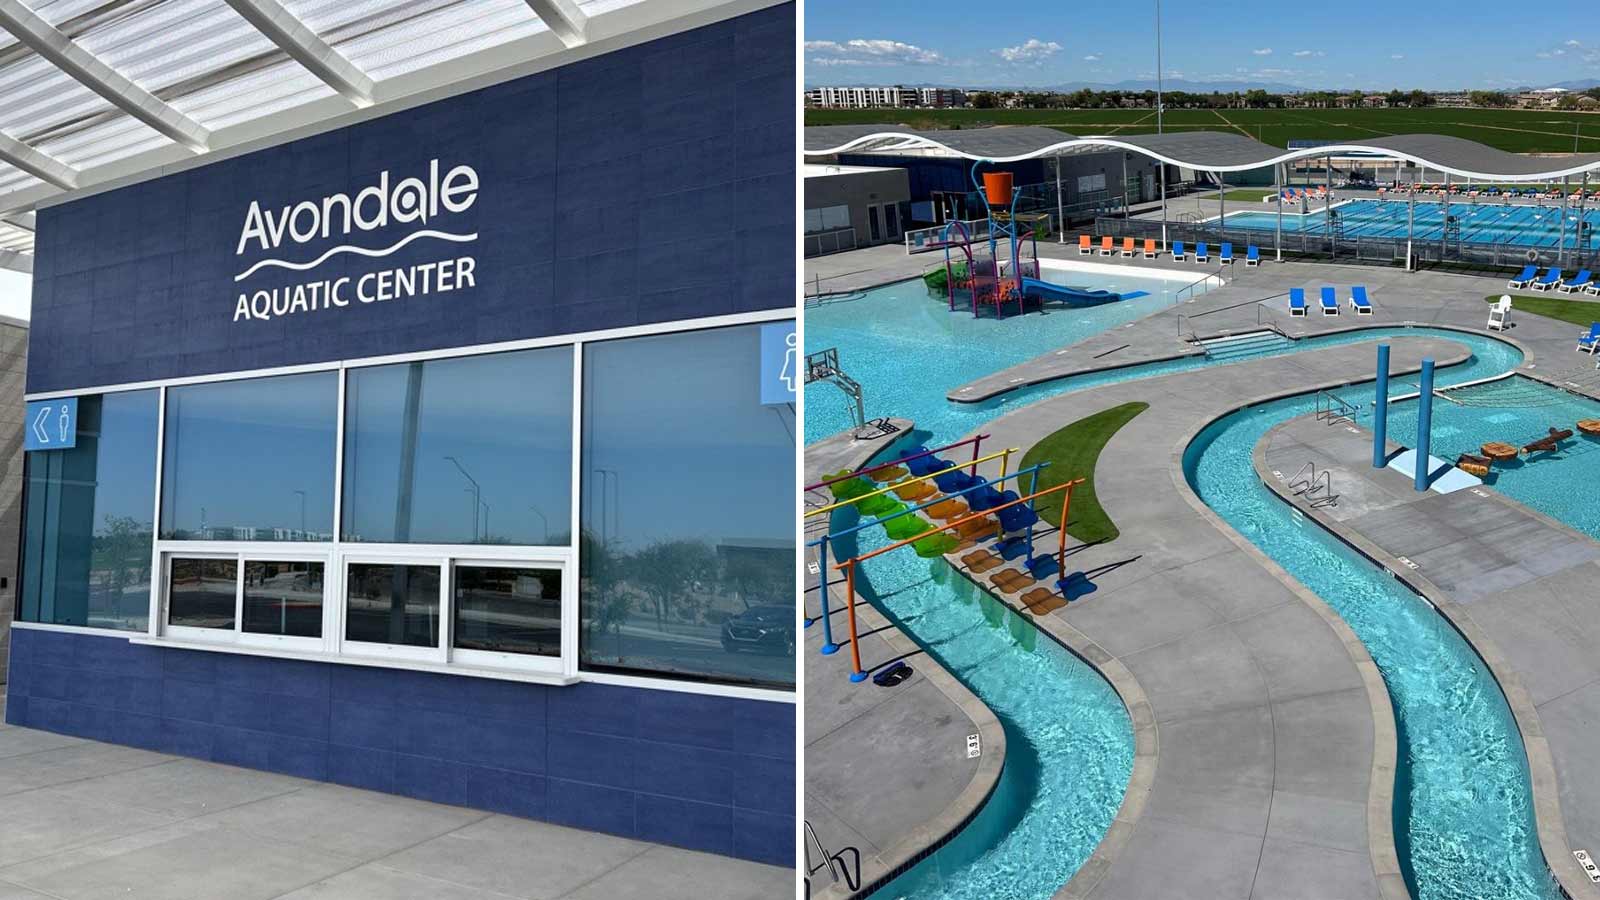 Split image showing the entry to the Avondale Aquatic Center on the left and an aerial view of the ...